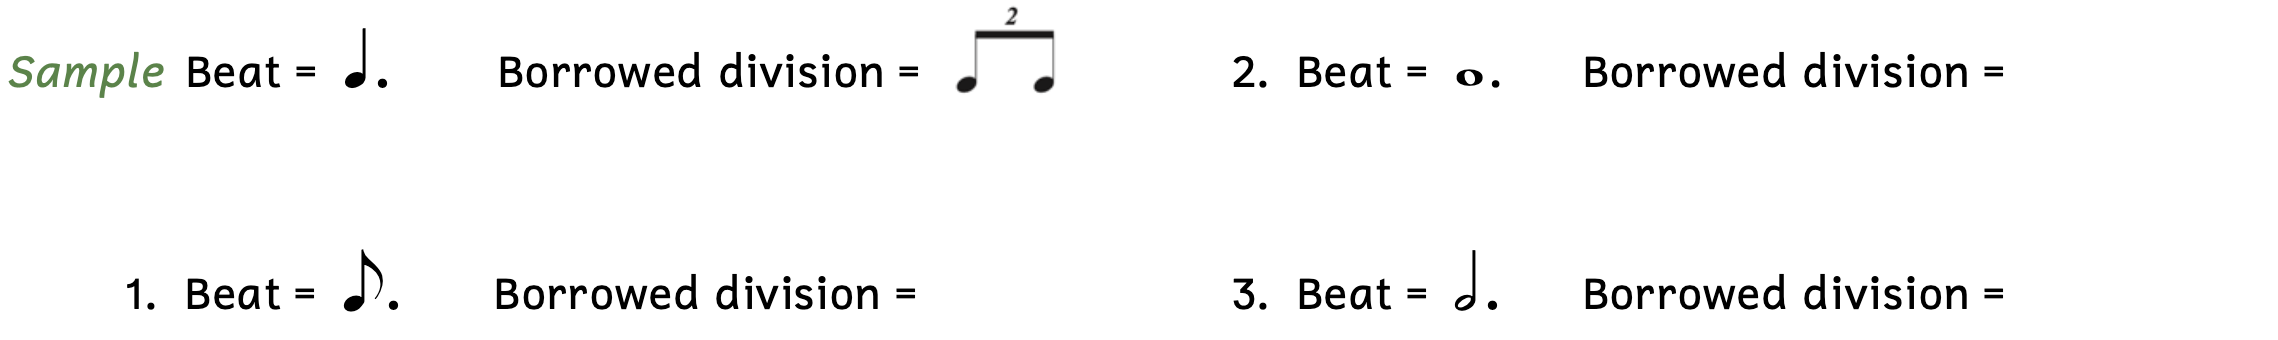 Exercise asking to write the borrowed division. Number 1 gives a dotted eighth note beat and asks for the borrowed division. Number 2 gives a dotted whole note beat and asks for the borrowed division. Number 3 gives a dotted half note beat and asks for the borrowed division.